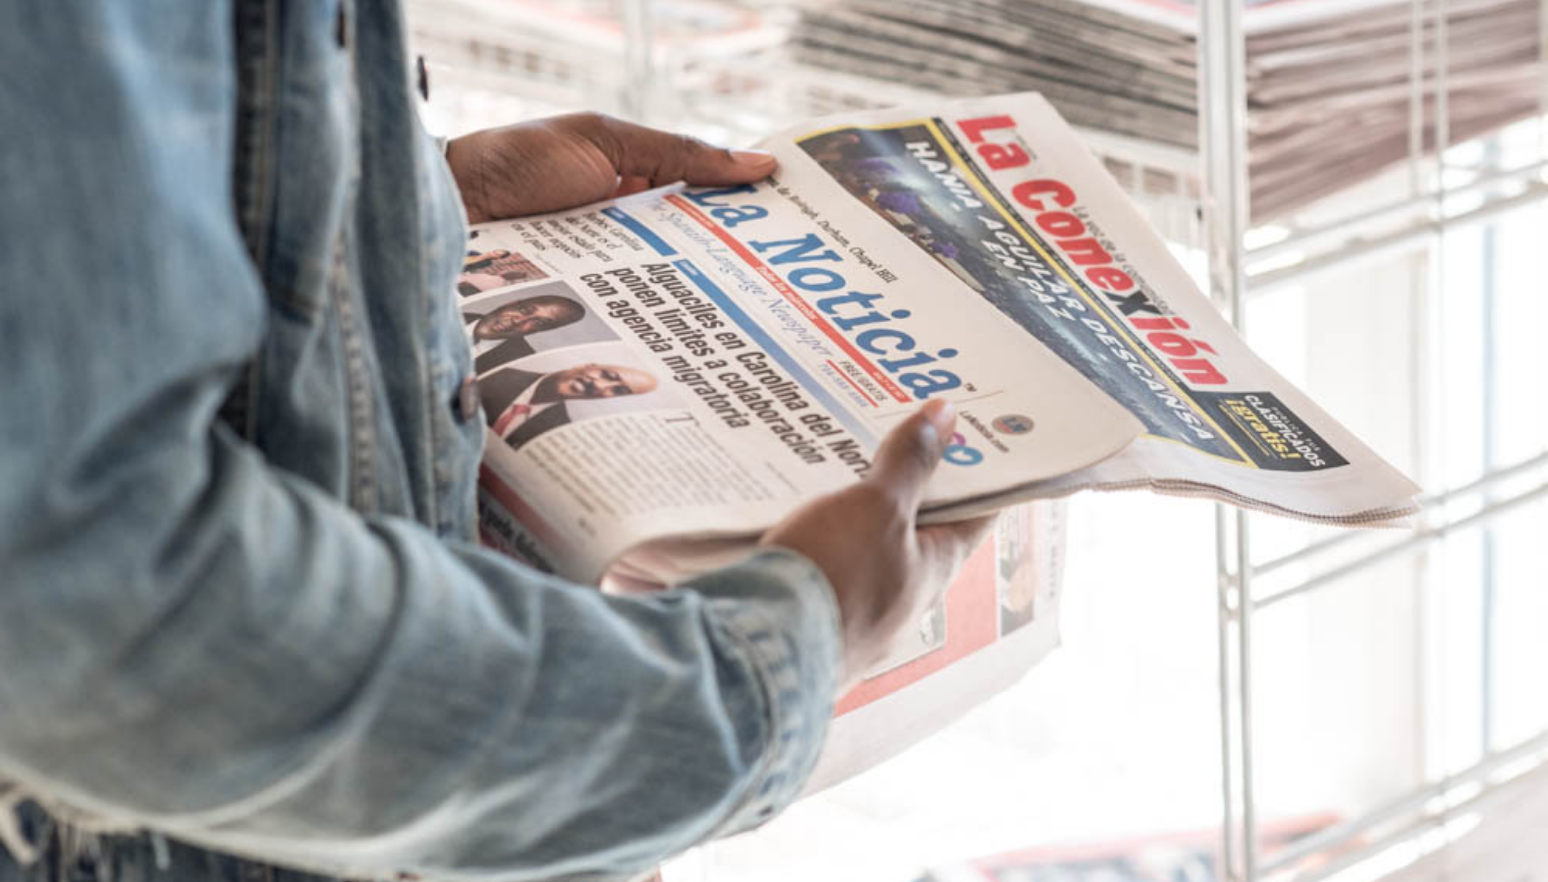 Photo of Spanish-language newspapers, held by a reader.